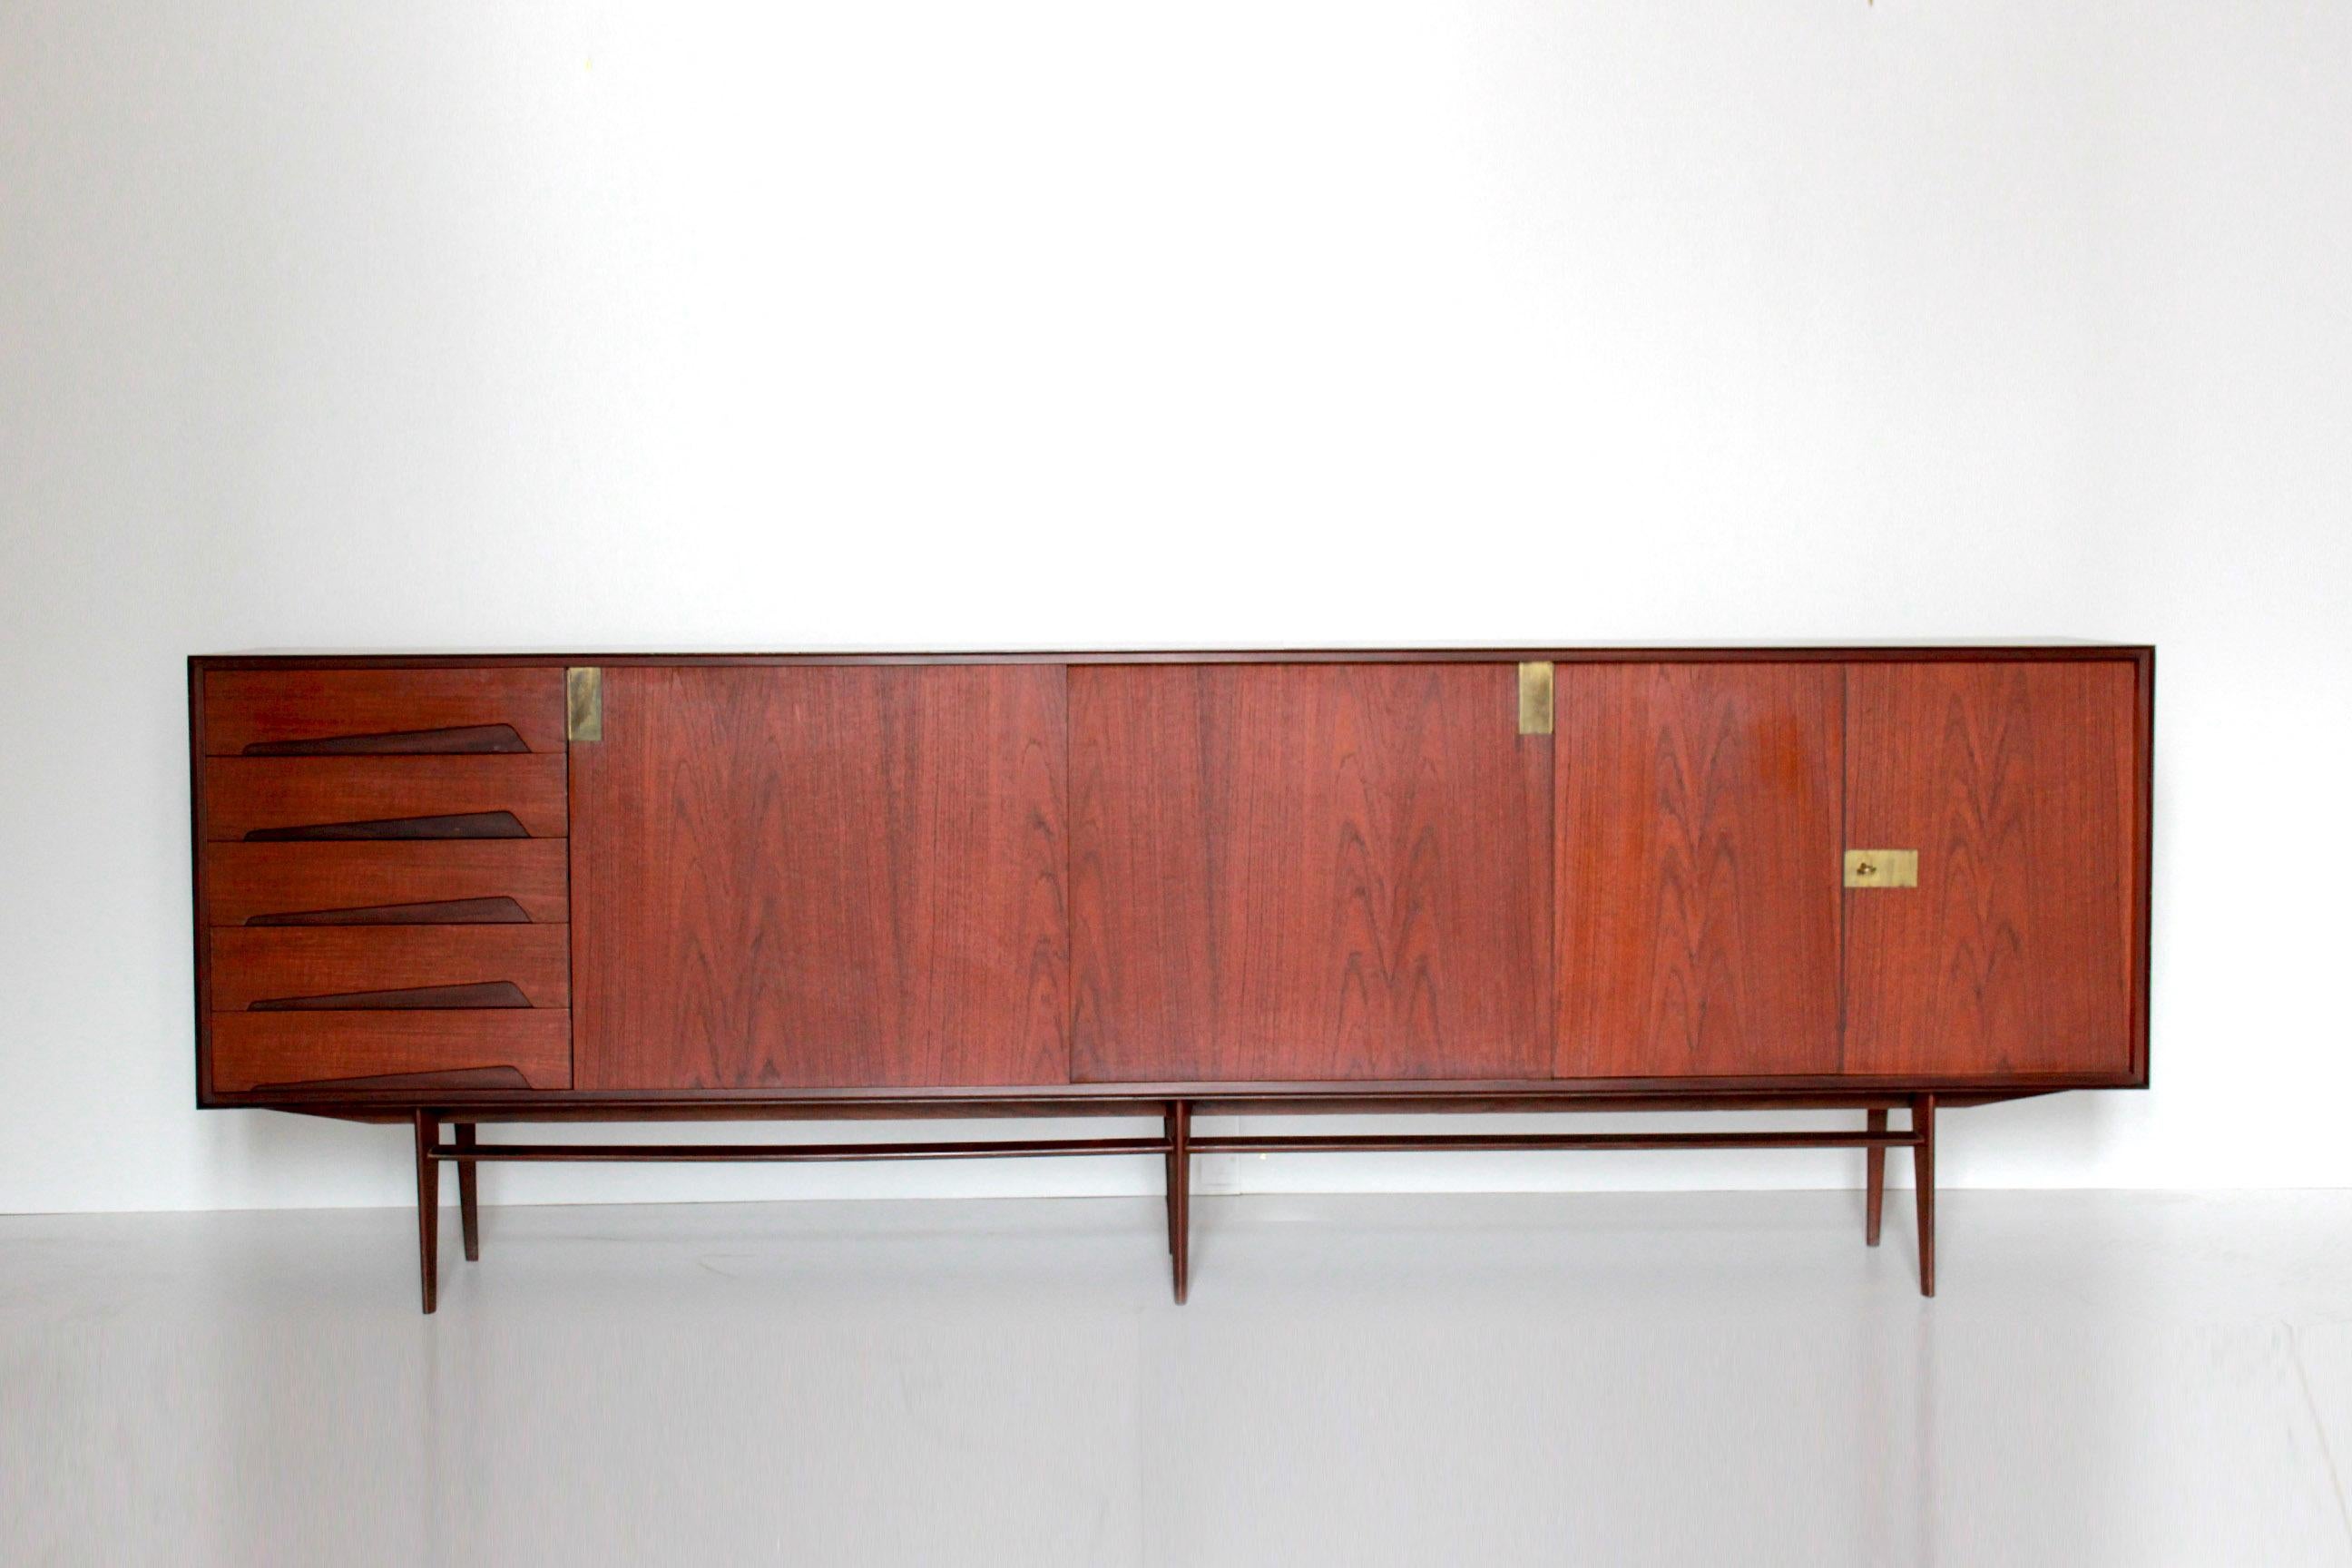 A rare vintage dining room set designed by Edmondo Palutari fori italian Iconic manufacturer Vittorio Dassi. 1950s vintage extendible table and vintage long sideboard.

The items have been fully restored as follows:

Sideboard: Rosenwood wood and